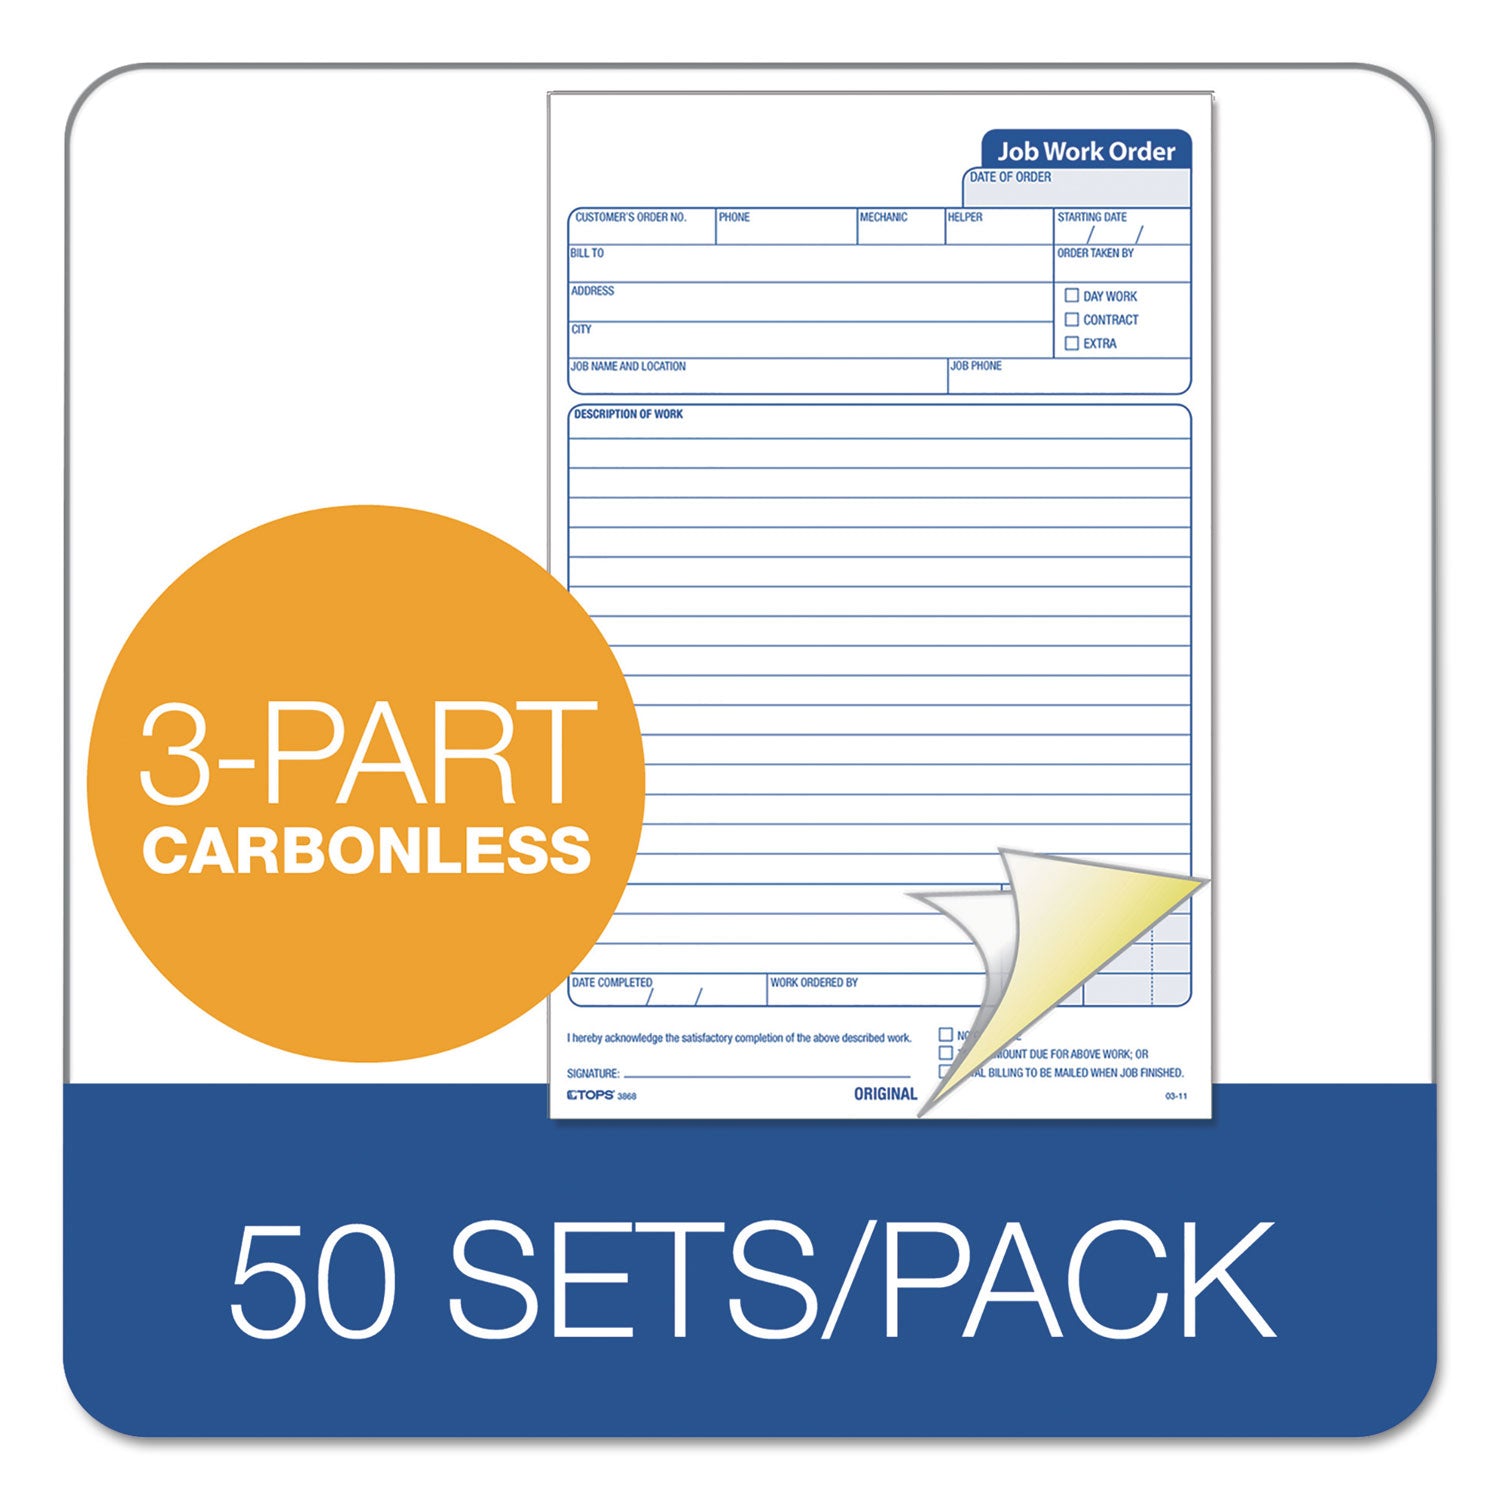 Job Work Order, Three-Part Carbonless, 5.66 x 8.63, 50 Forms Total - 